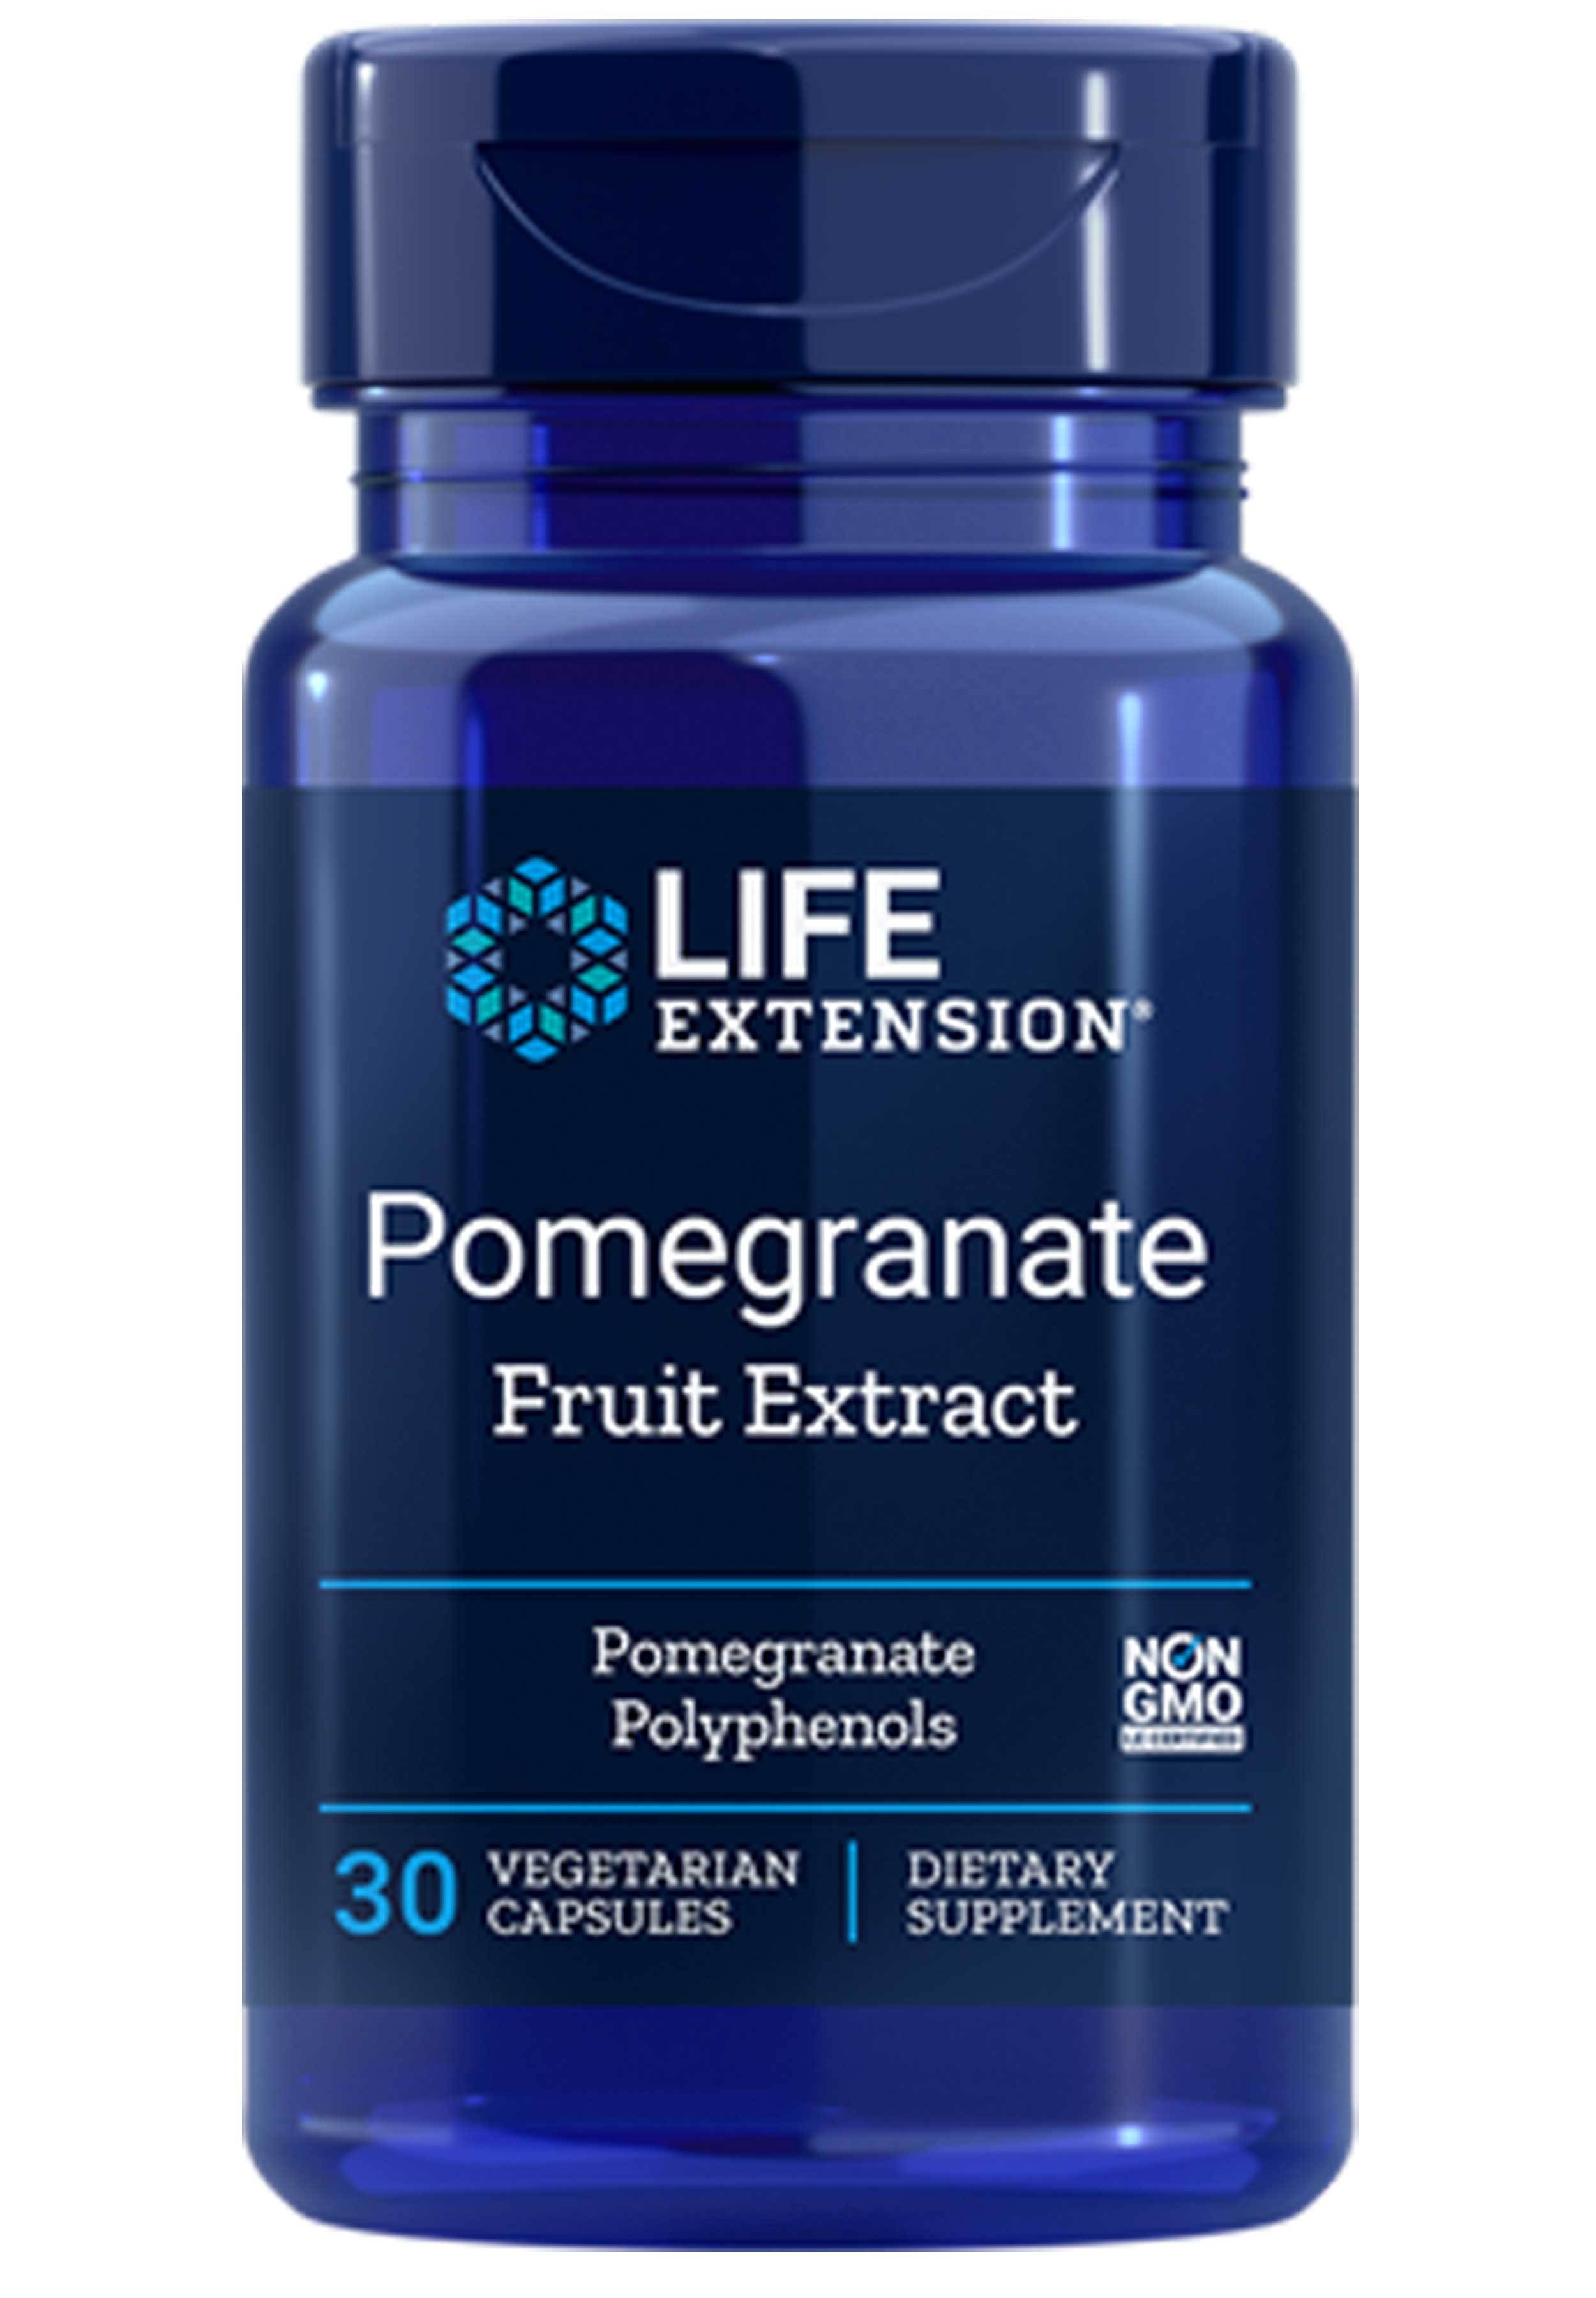 Life Extension Pomegranate Fruit Extract